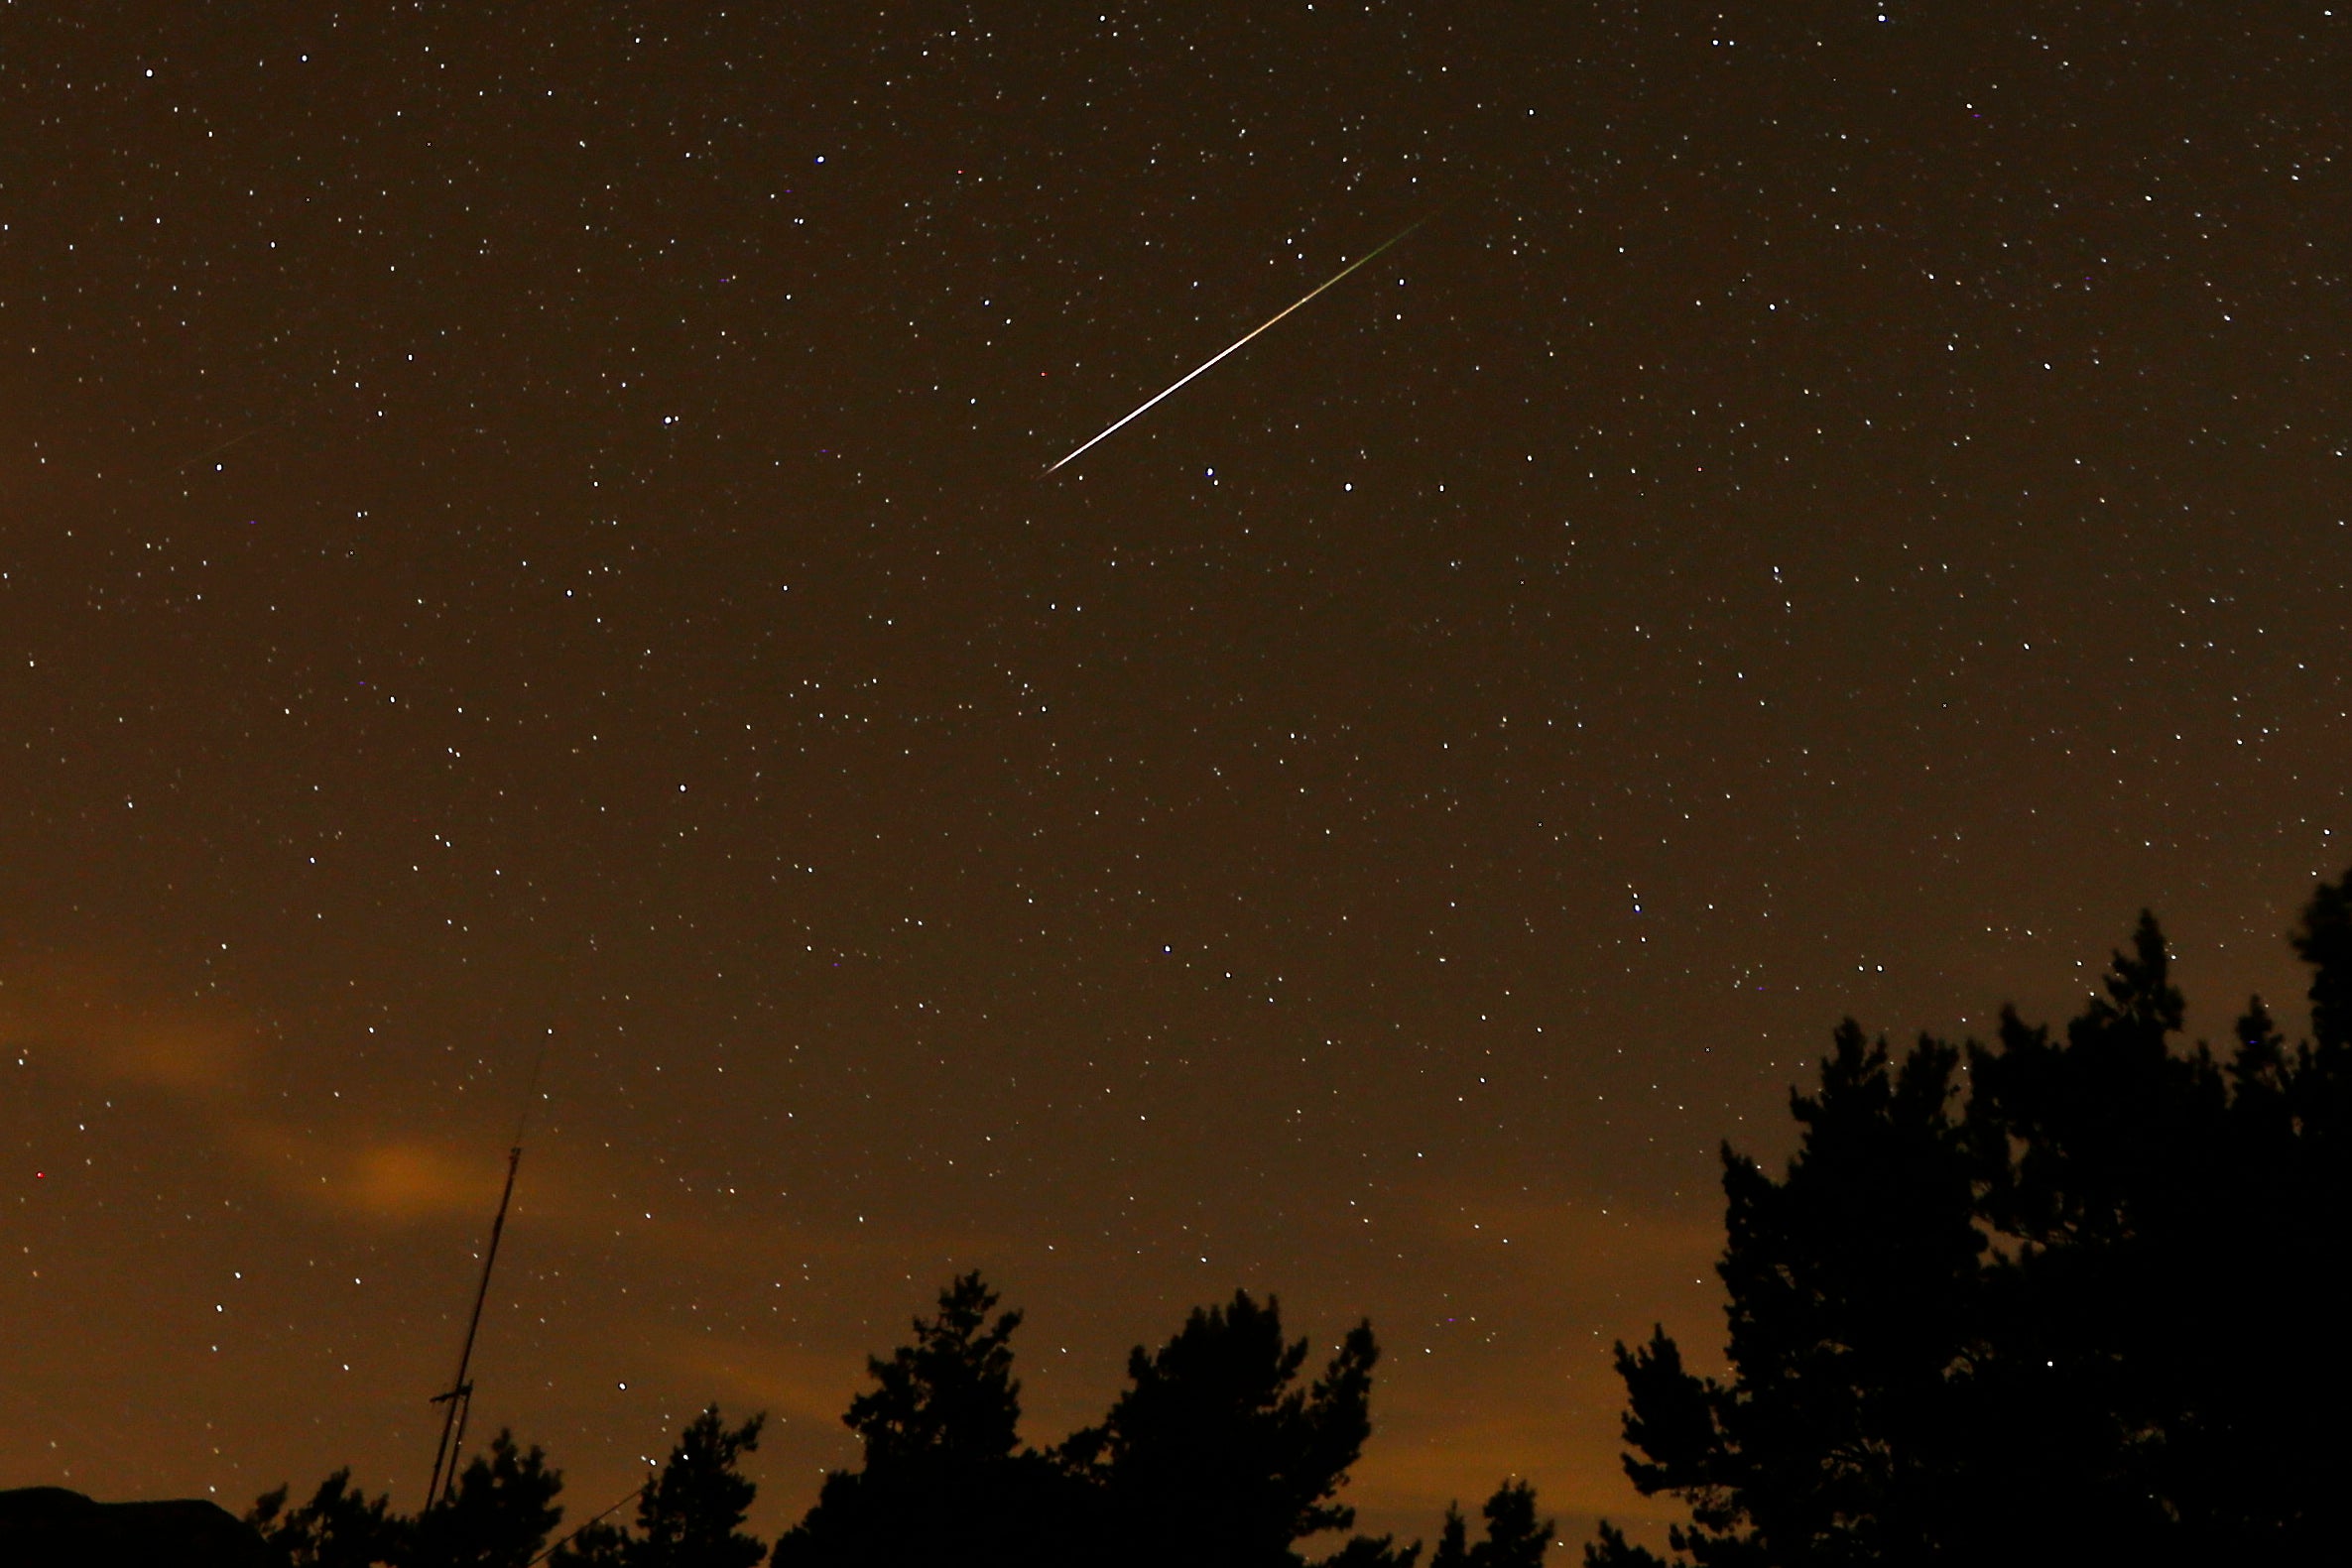 The Perseid meteor shower peaks this weekend and it's even better this